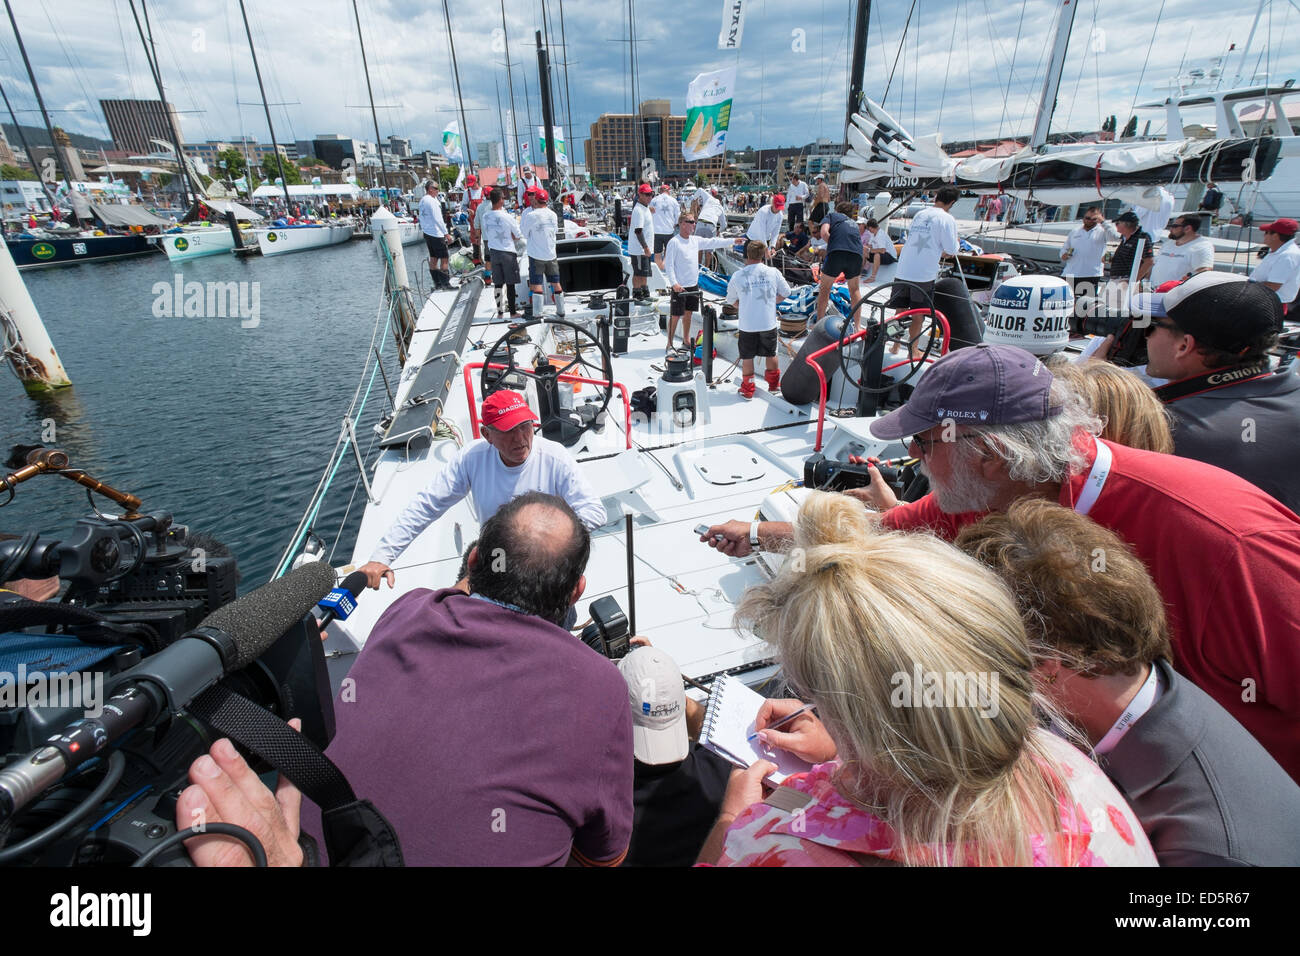 Hobart, Australia. 29th December, 2014. Hobart Australia,Sydney to Hobart Yacht Race. Super Maxi yacht Giacomo's captain meets the press at the docks in Hobart.The yacht arrived under engine power with a broken mast to join end of race celebrations. Credit:  mistadas/Alamy Live News Stock Photo